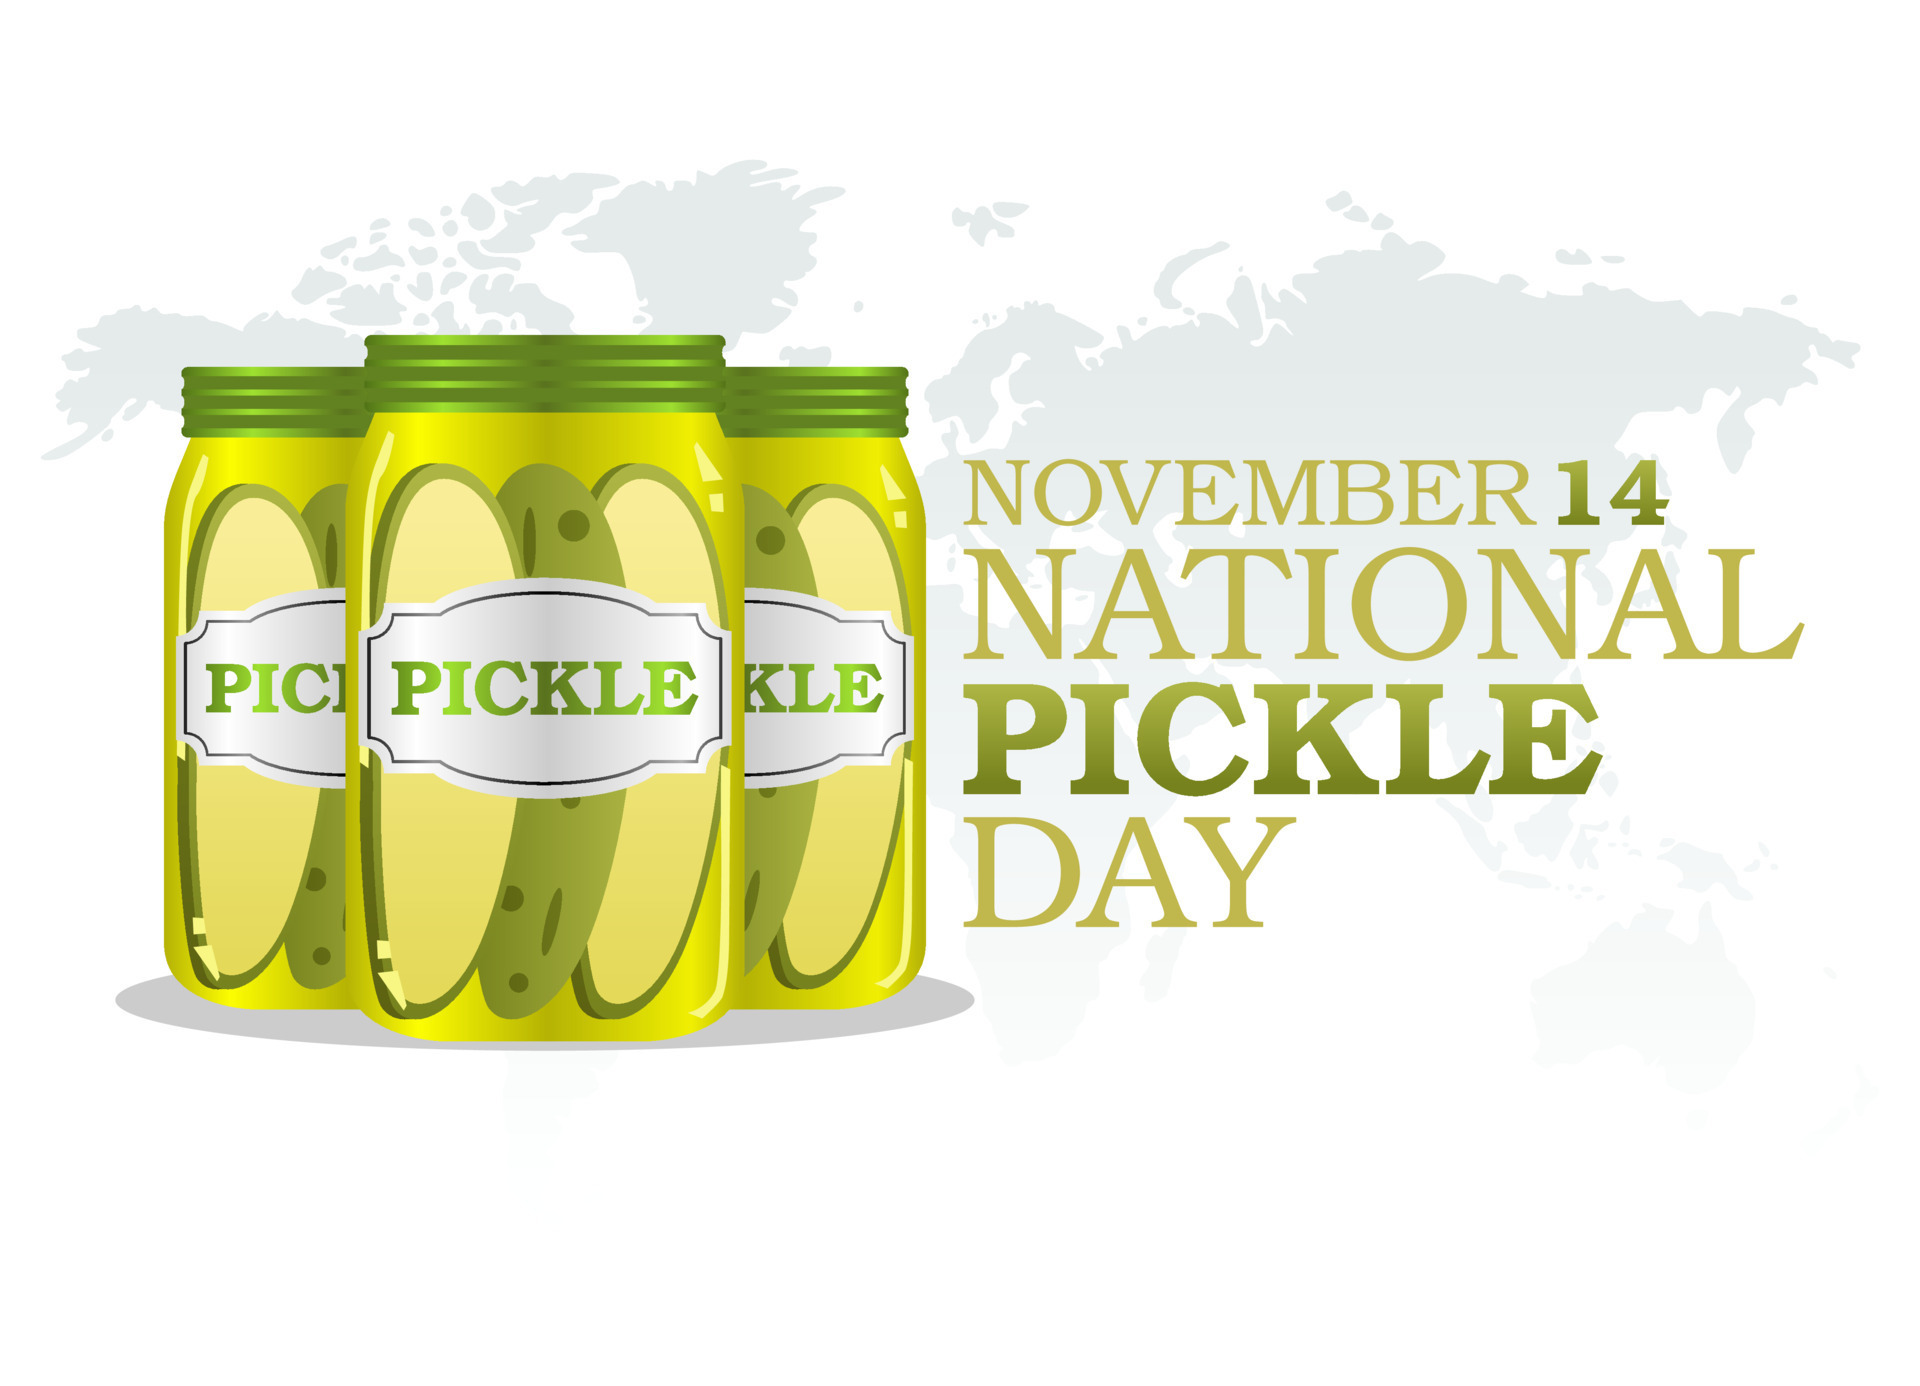 Vector Graphic Of National Pickle Day Good For National Pickle Day